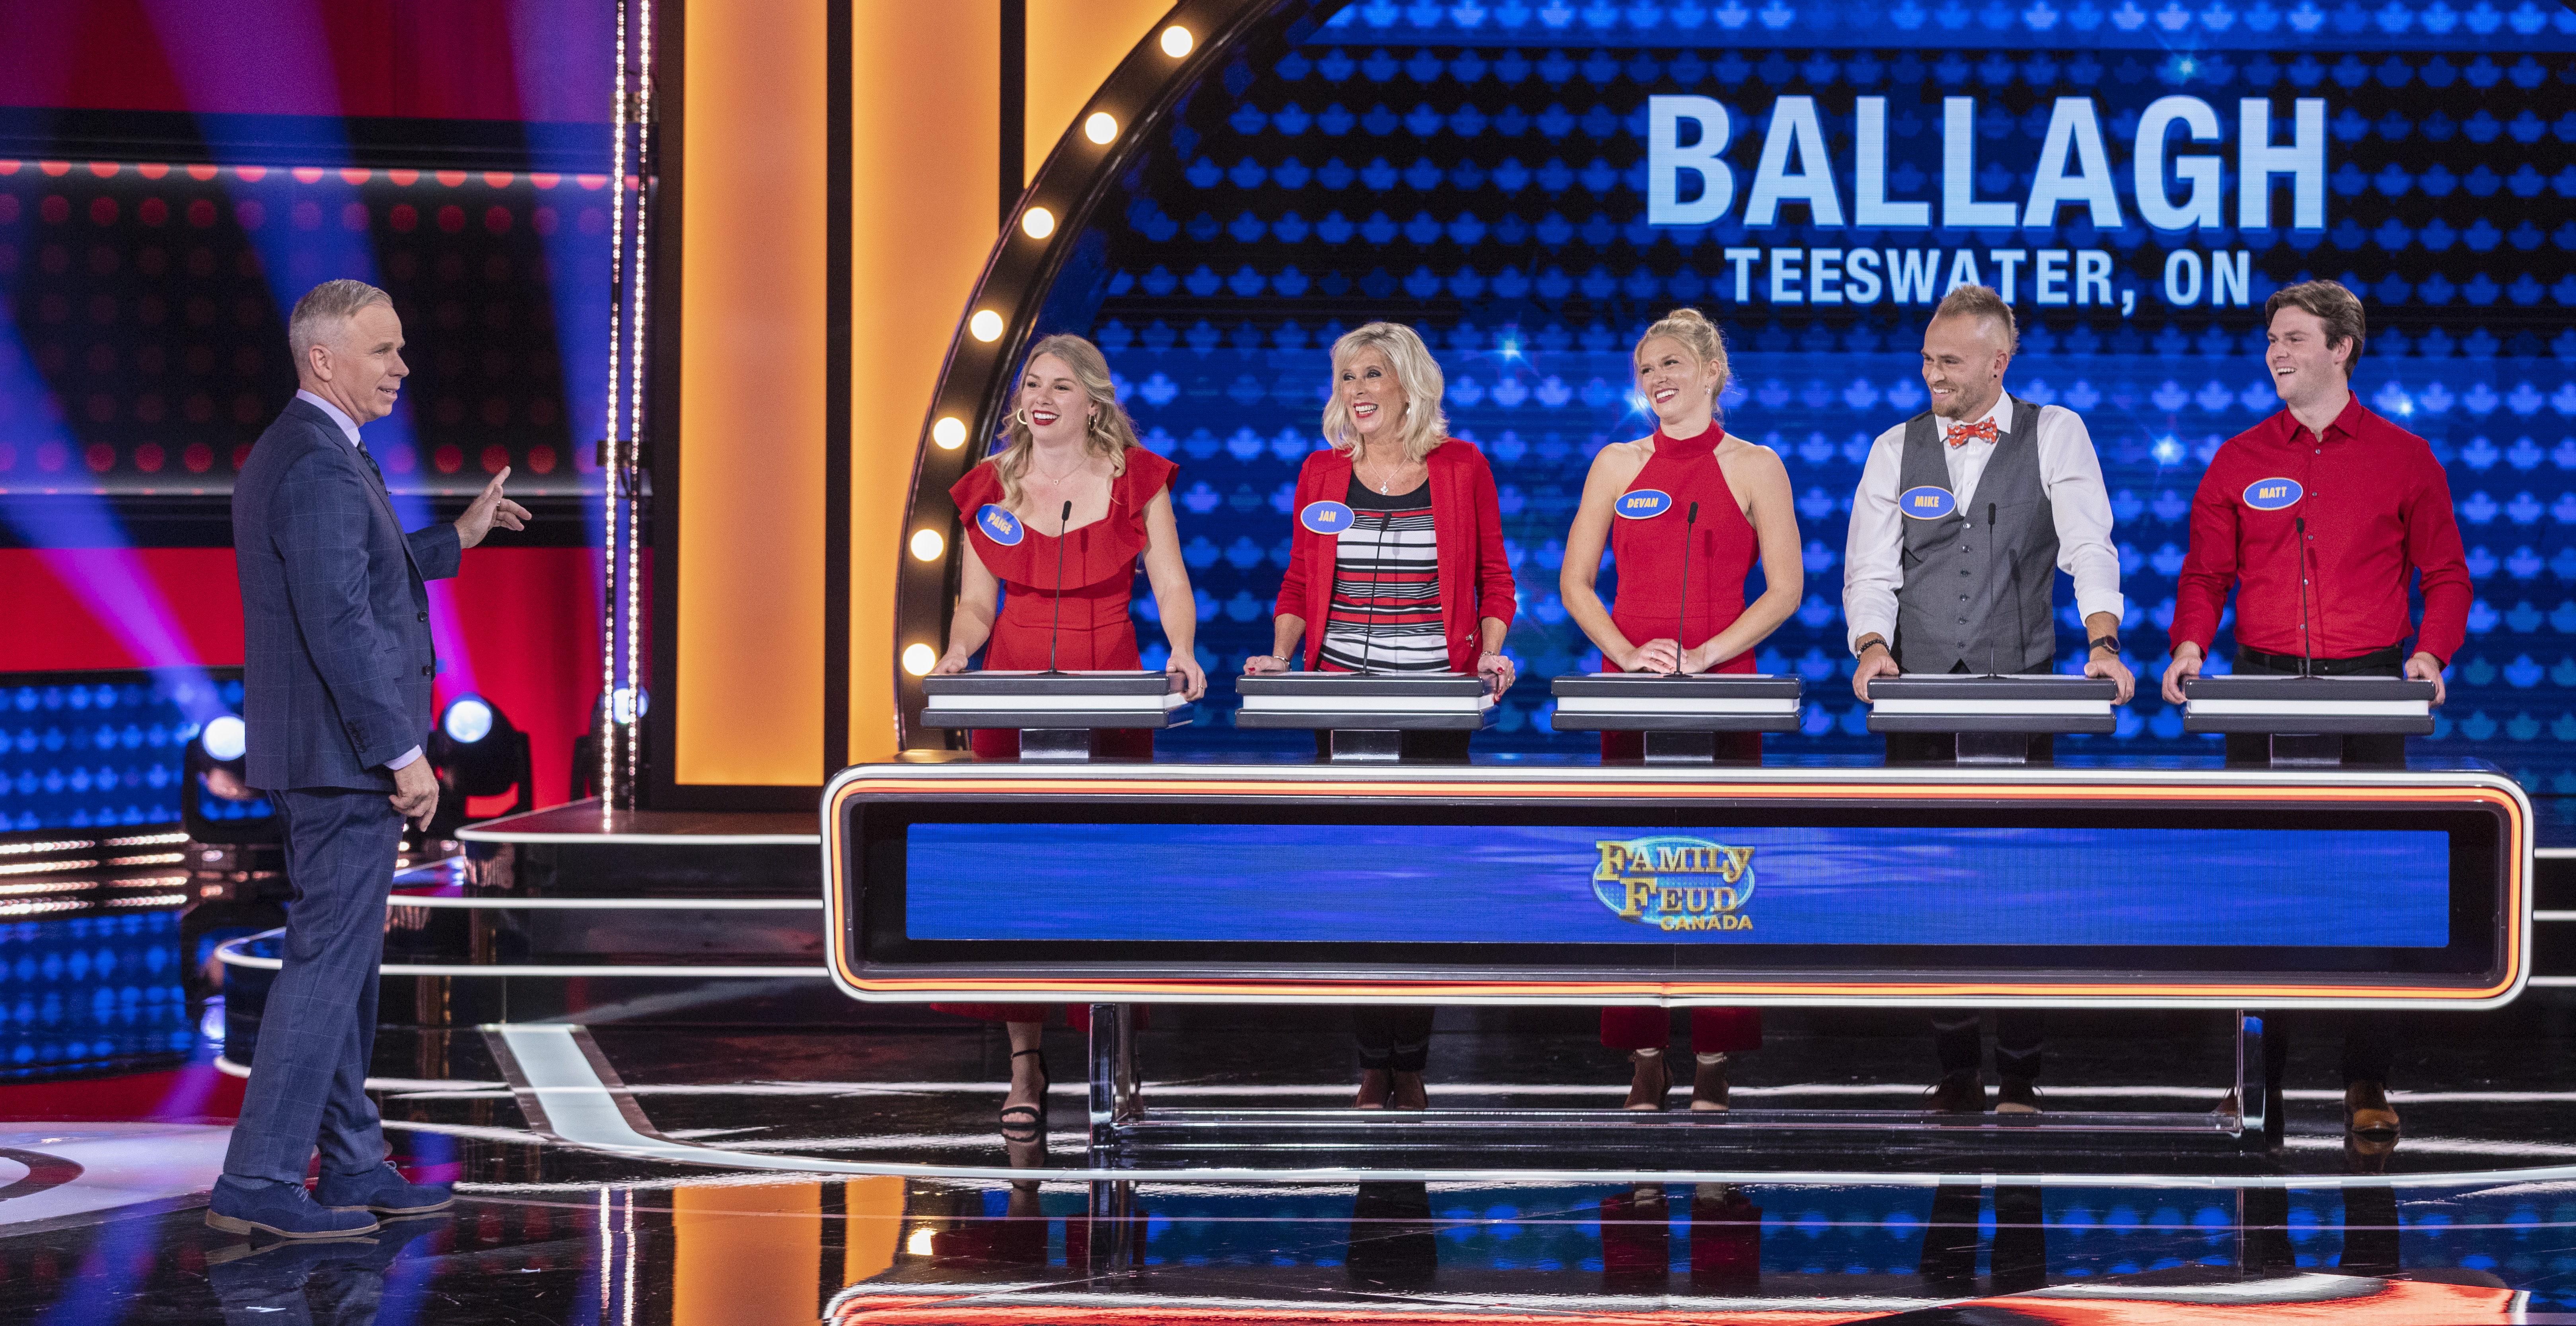 Bruce County family appears on Family Feud Canada